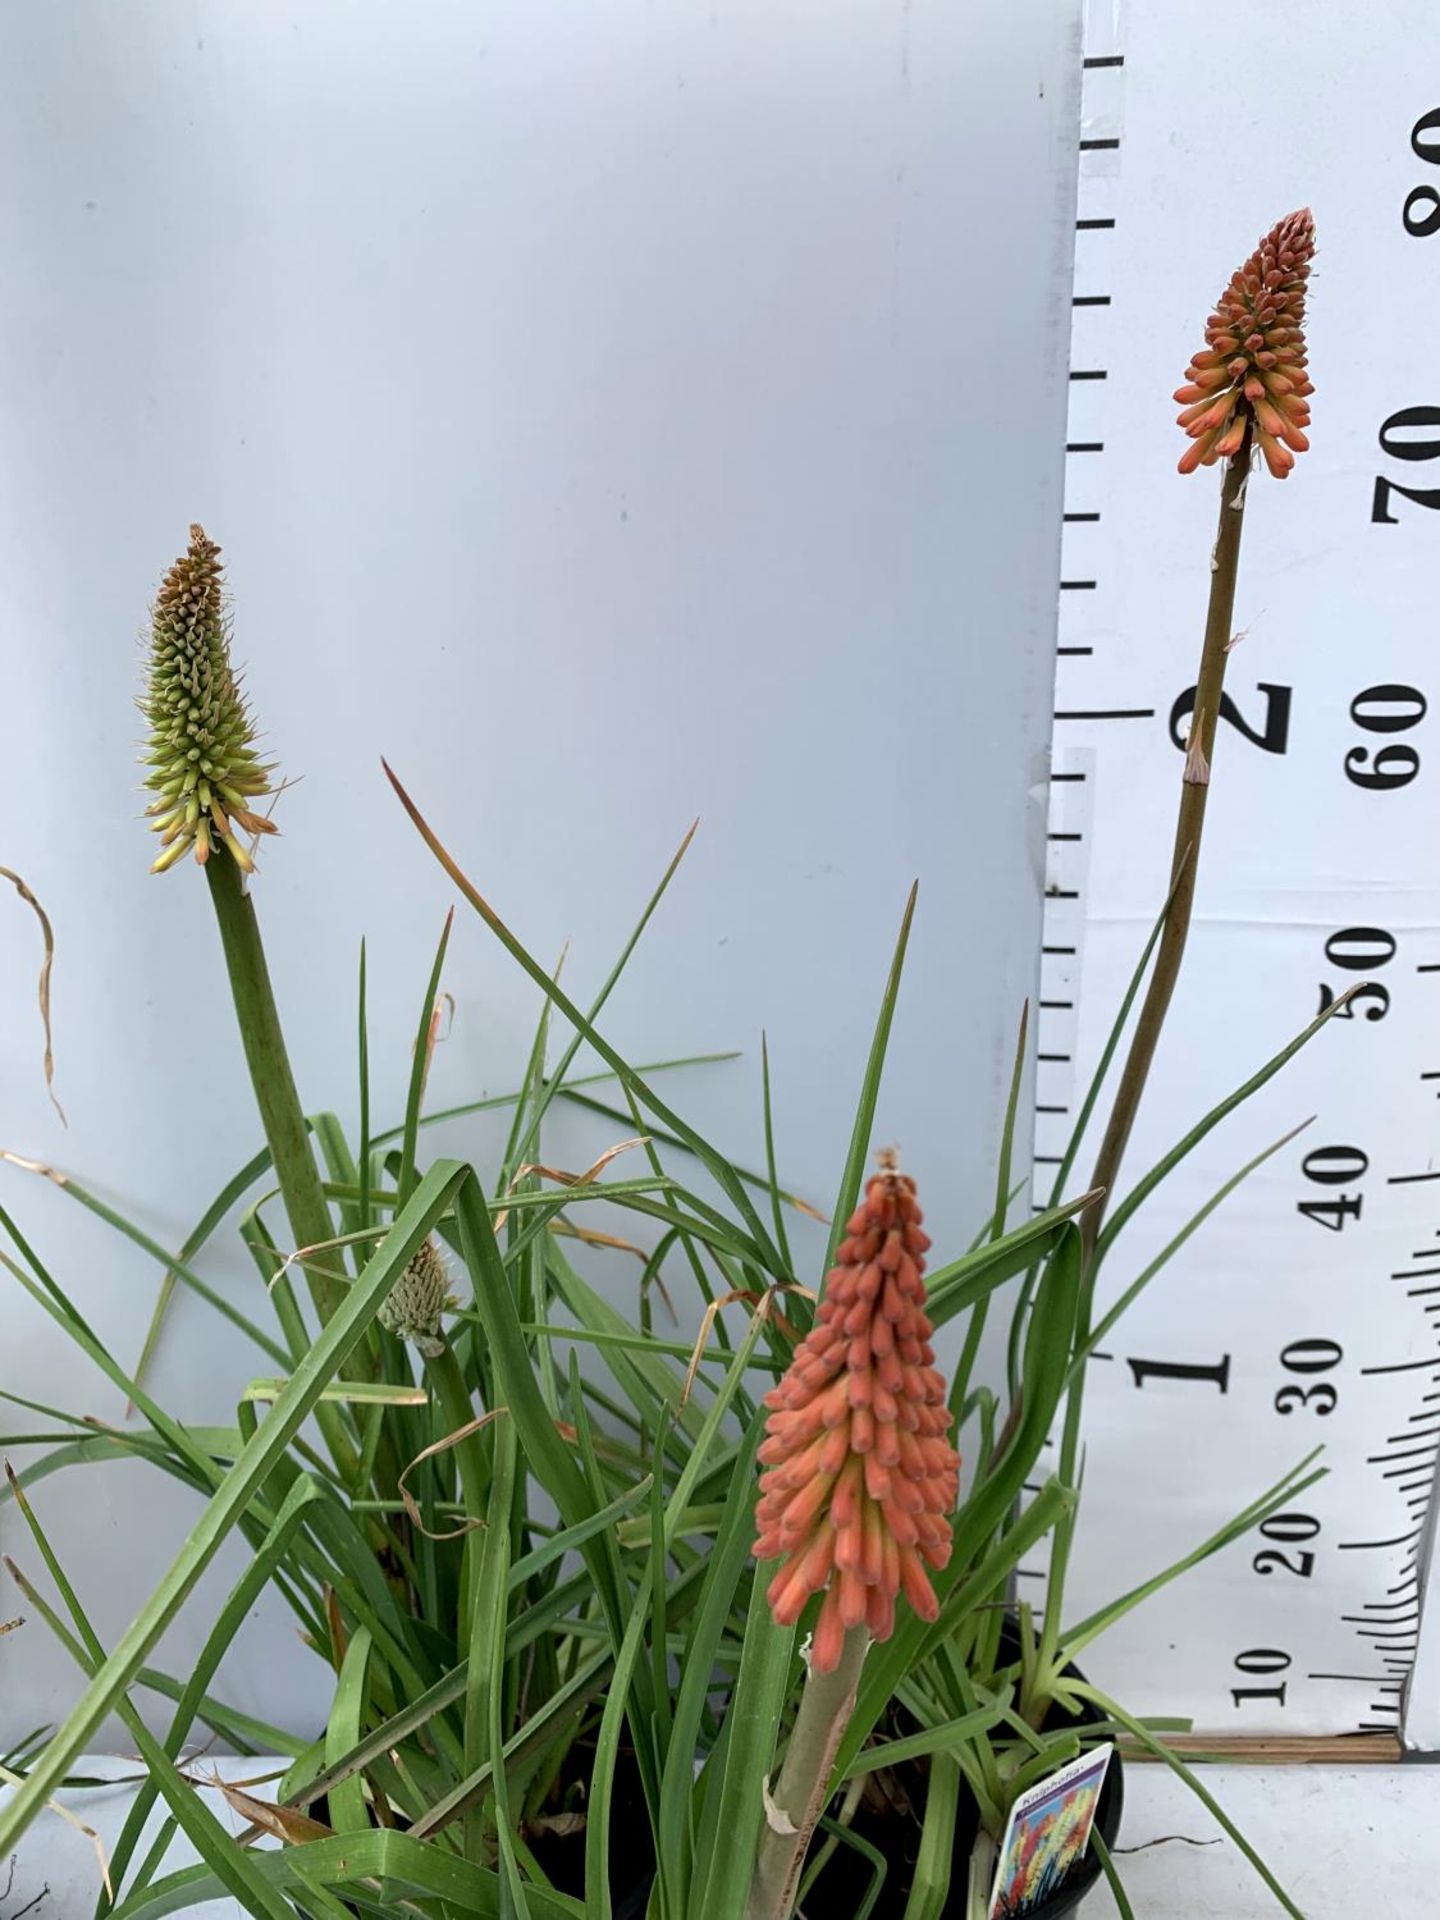 THREE KNIPHOFIA RED HOT POKER 'FLAMENCO' IN 2 LTR POTS APPROX 70- 80CM IN HEIGHT PLUS VAT TO BE SOLD - Image 5 of 8